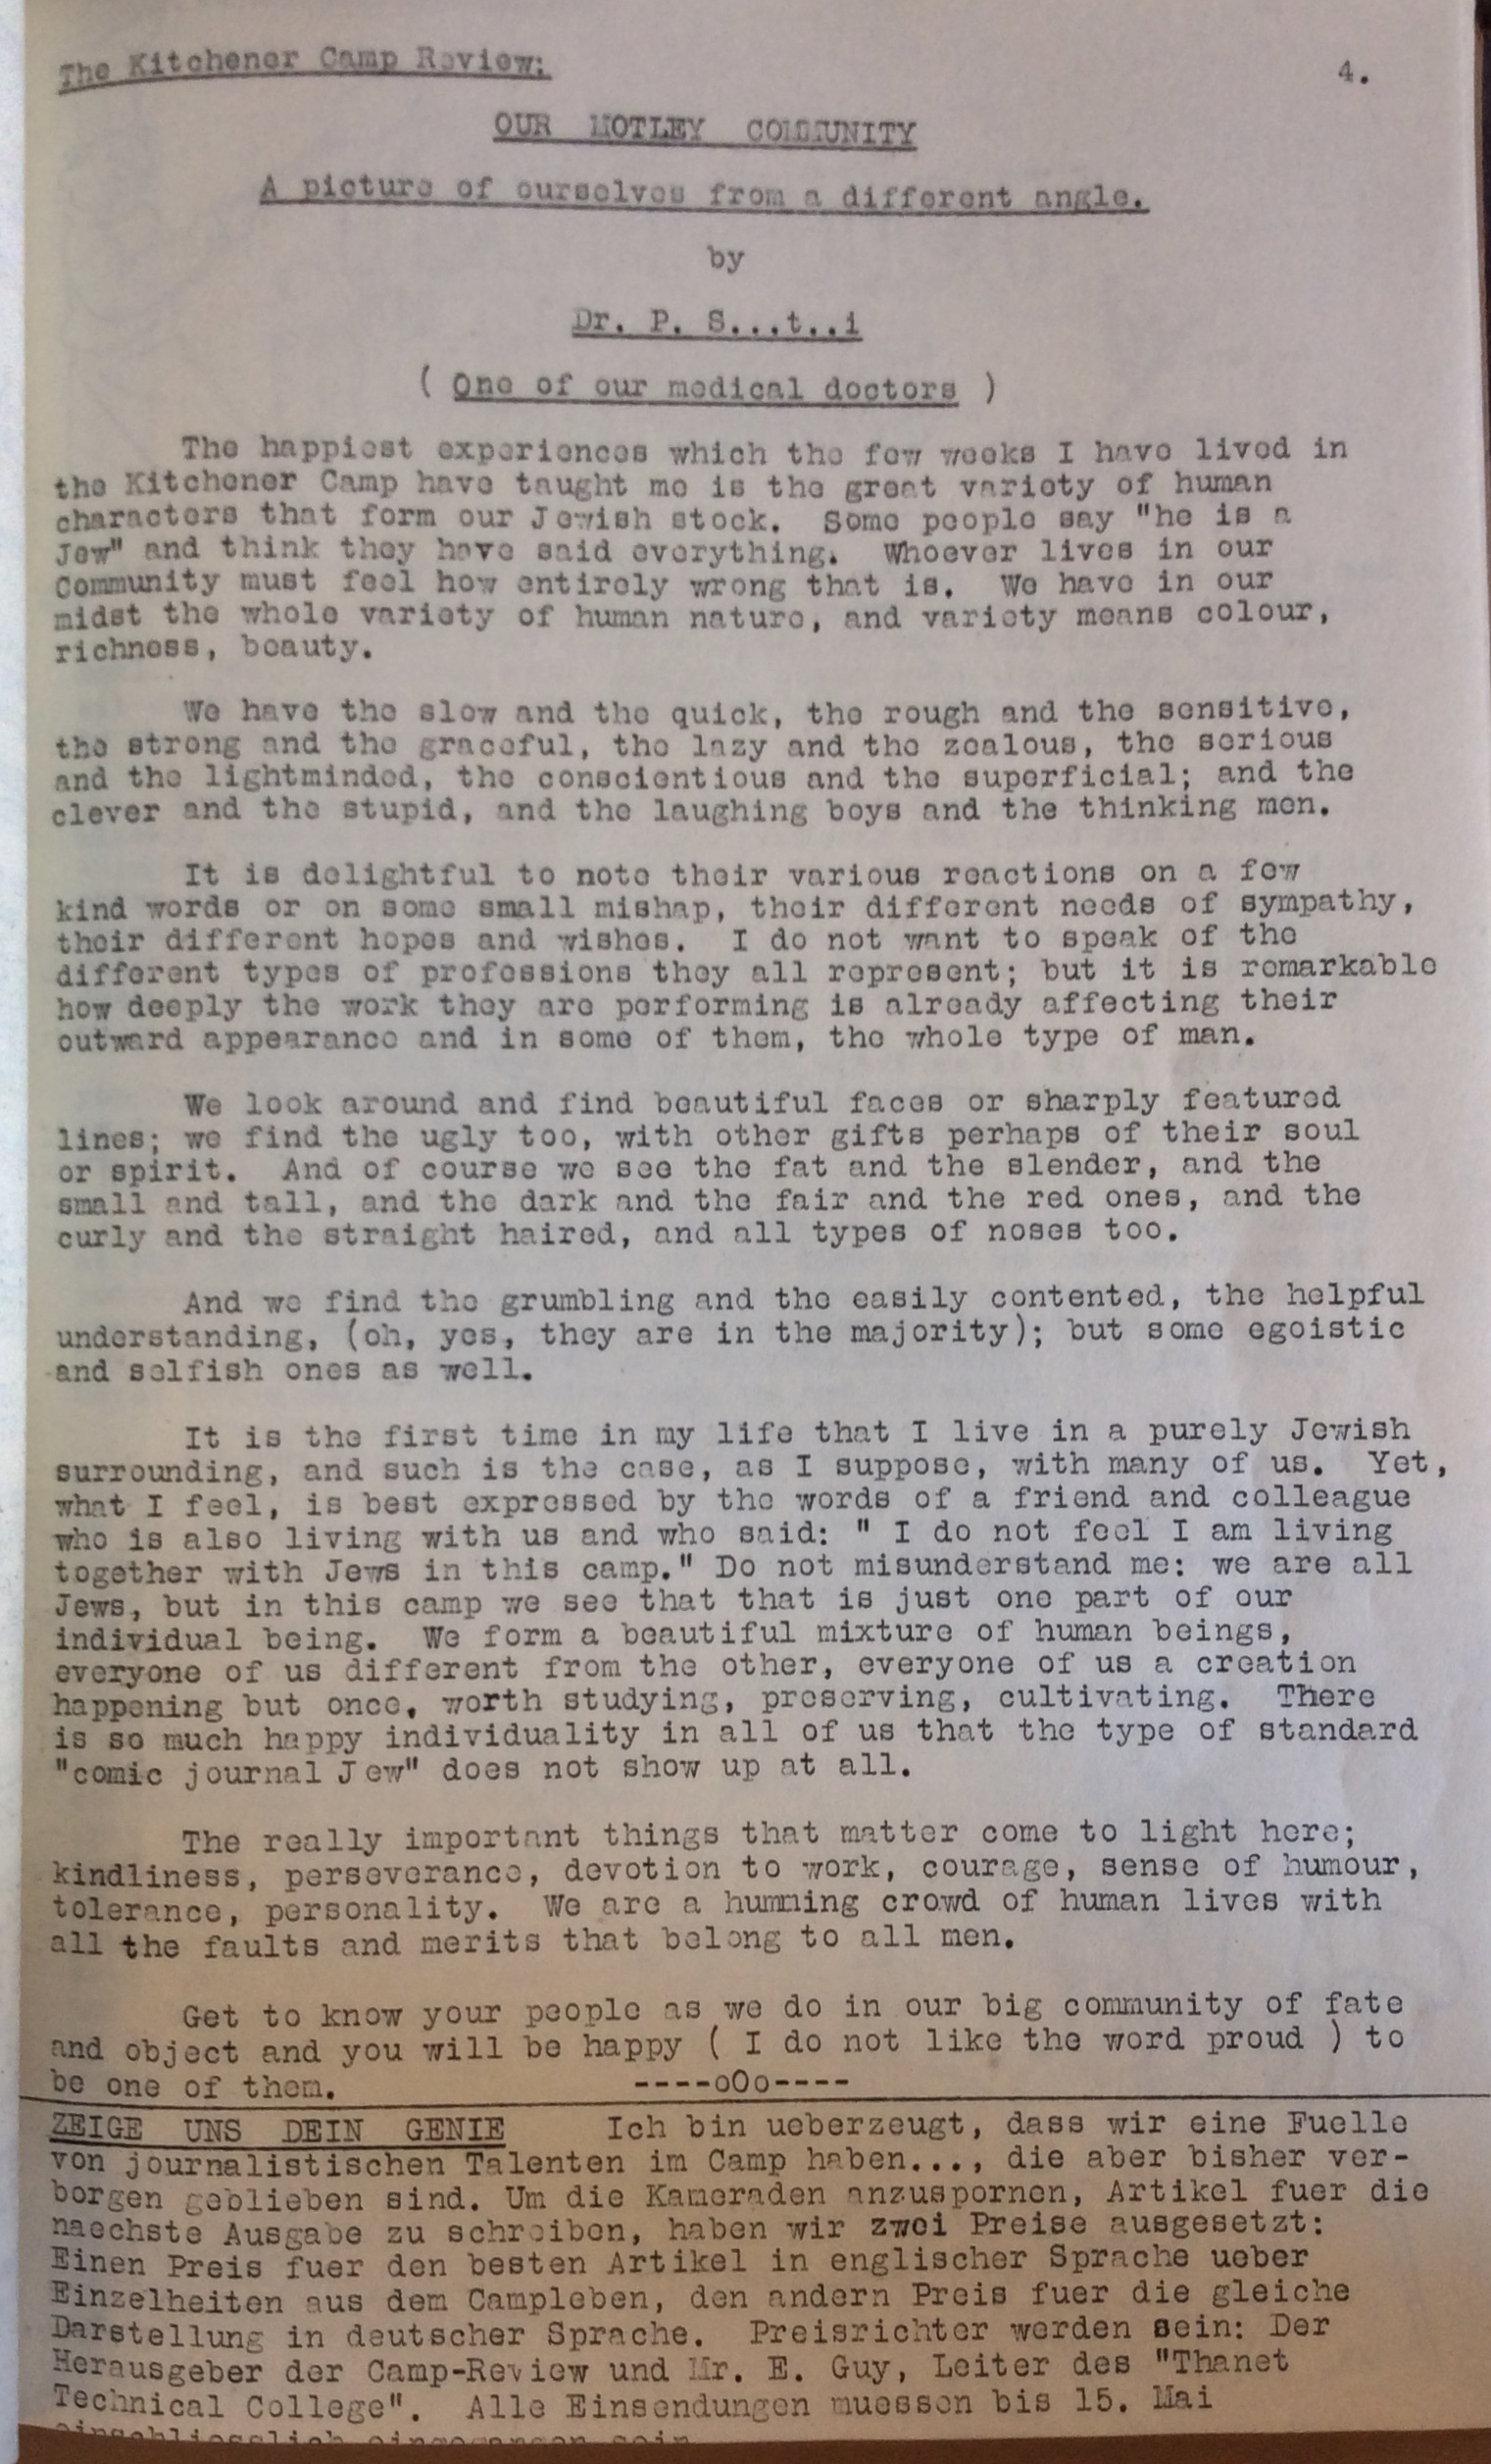 Kitchener Camp Review, May 1939, page 4